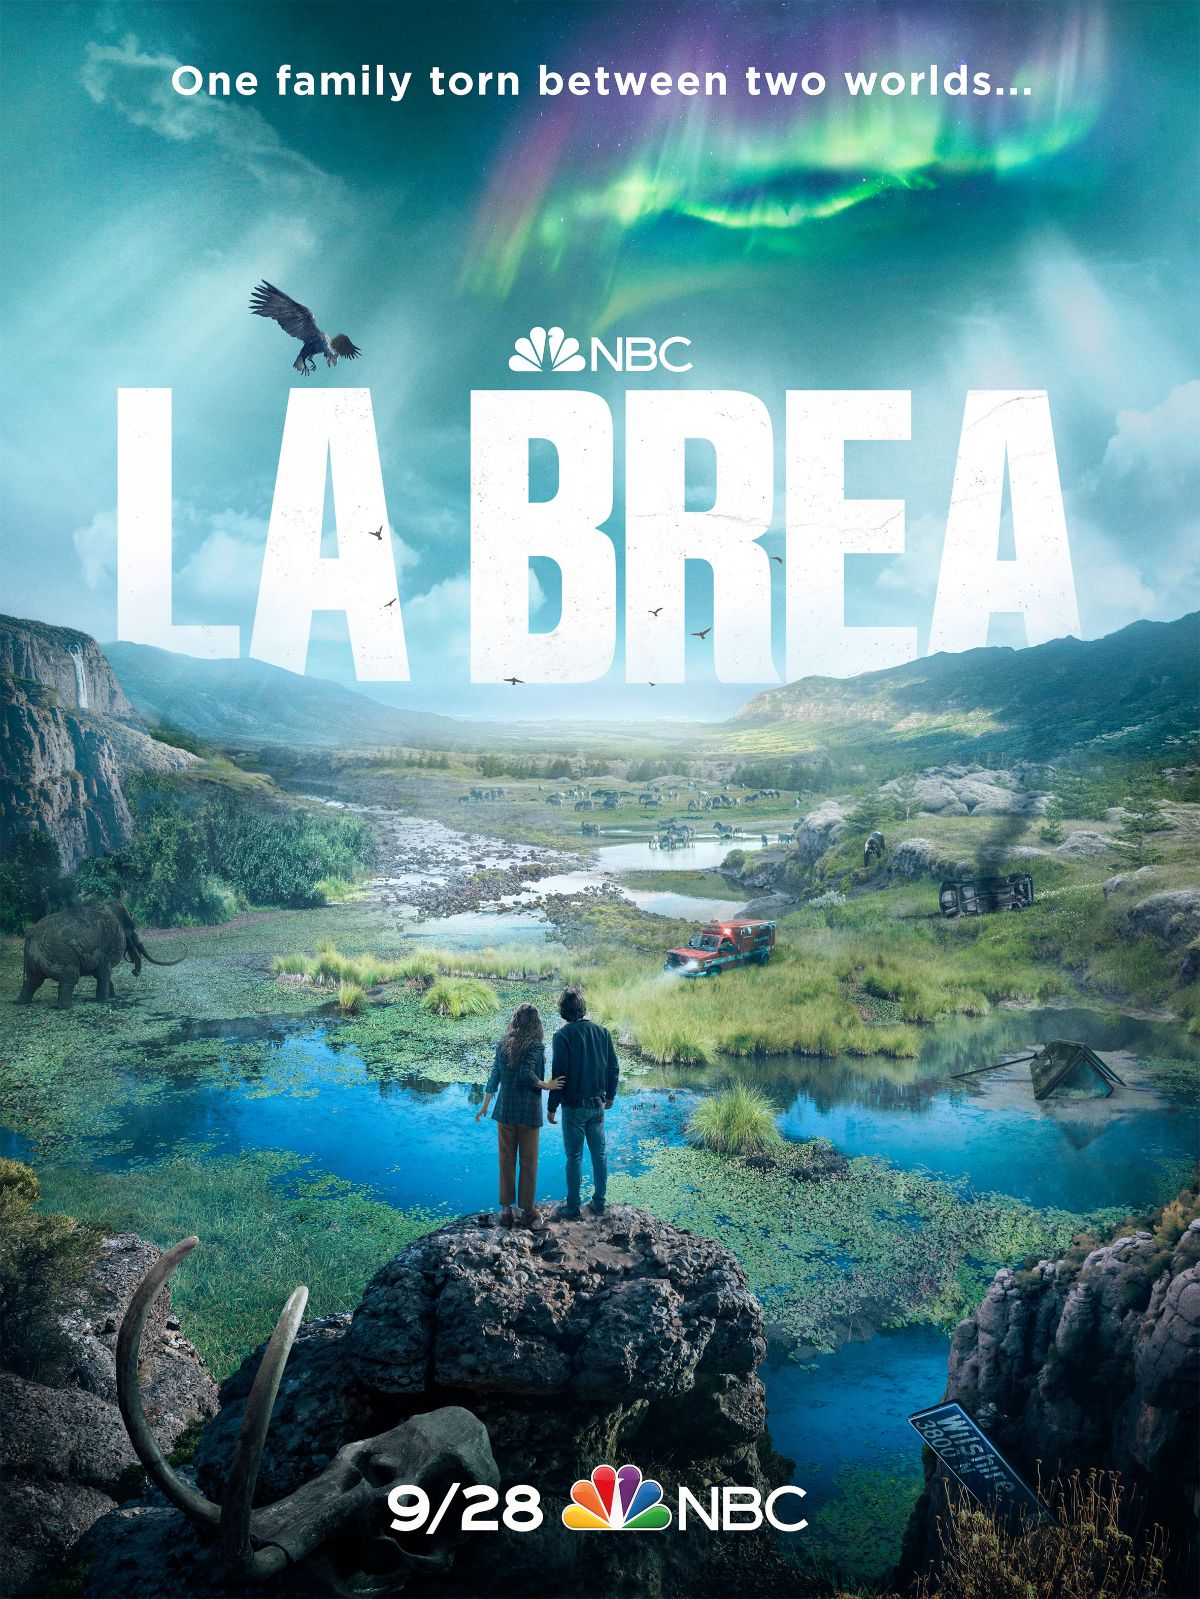 La Brea Posters Reveal the Divide Between Worlds on NBC's New Series